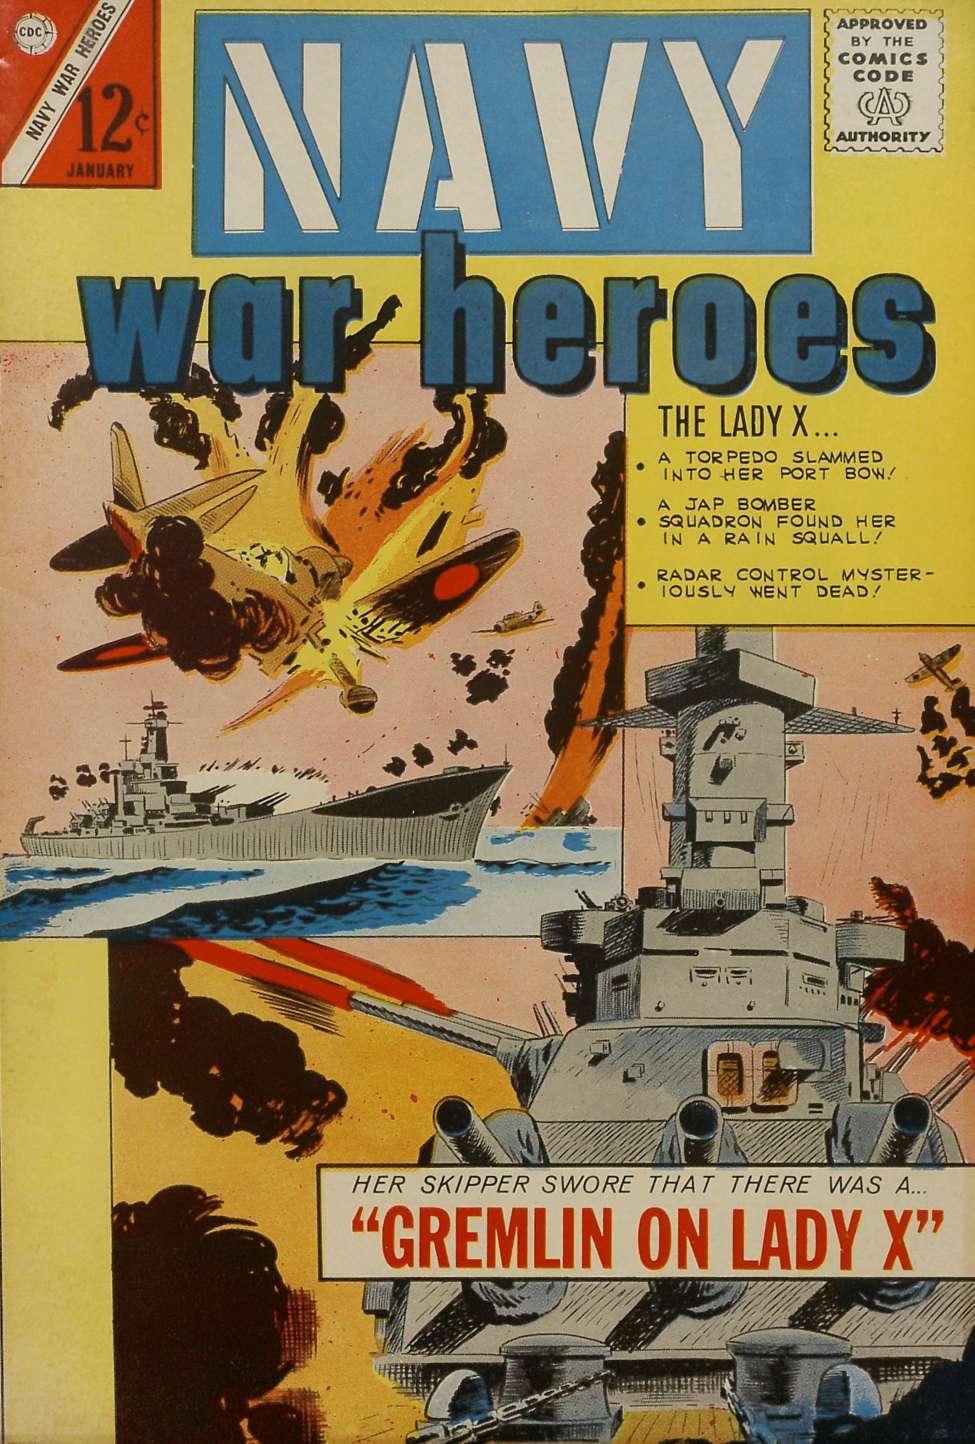 Comic Book Cover For Navy War Heroes 1 (alt) - Version 2